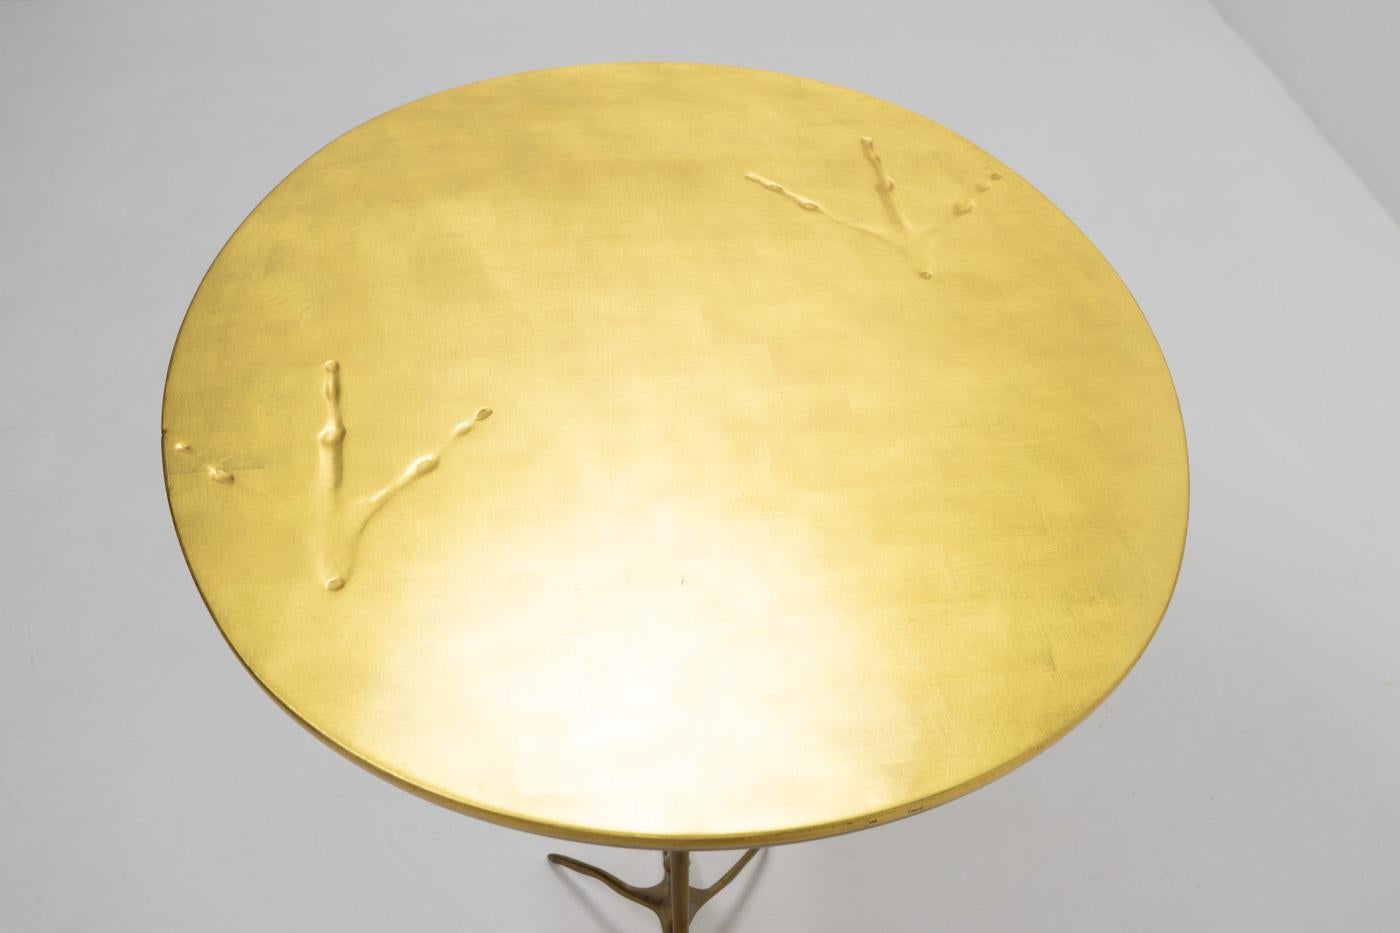 The Traccia (“Trace”) side or coffee table was designed by artist M�éret Oppenheim in 1939, representing a birdlike animal. The foot-printed, gold-leaf covered table top is in the shape of an egg, the solid cast bronze legs are those of a bird with